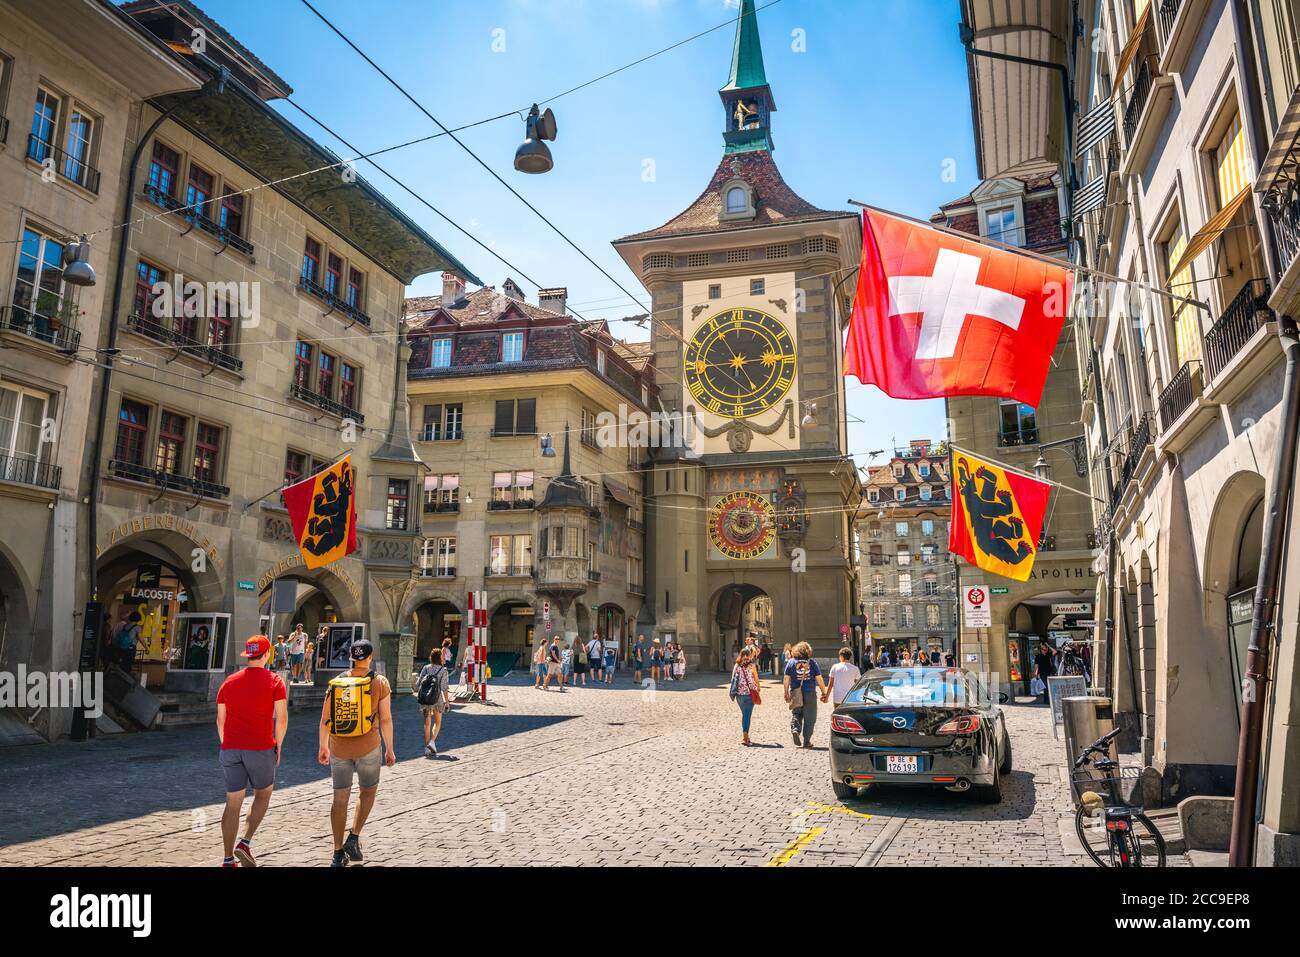 Bern Switzerland , 27 June 2020 : Old street view with tourists flags and Zytglogge clock tower in Kramgasse street in Bern old town Switzerland Stock Photo